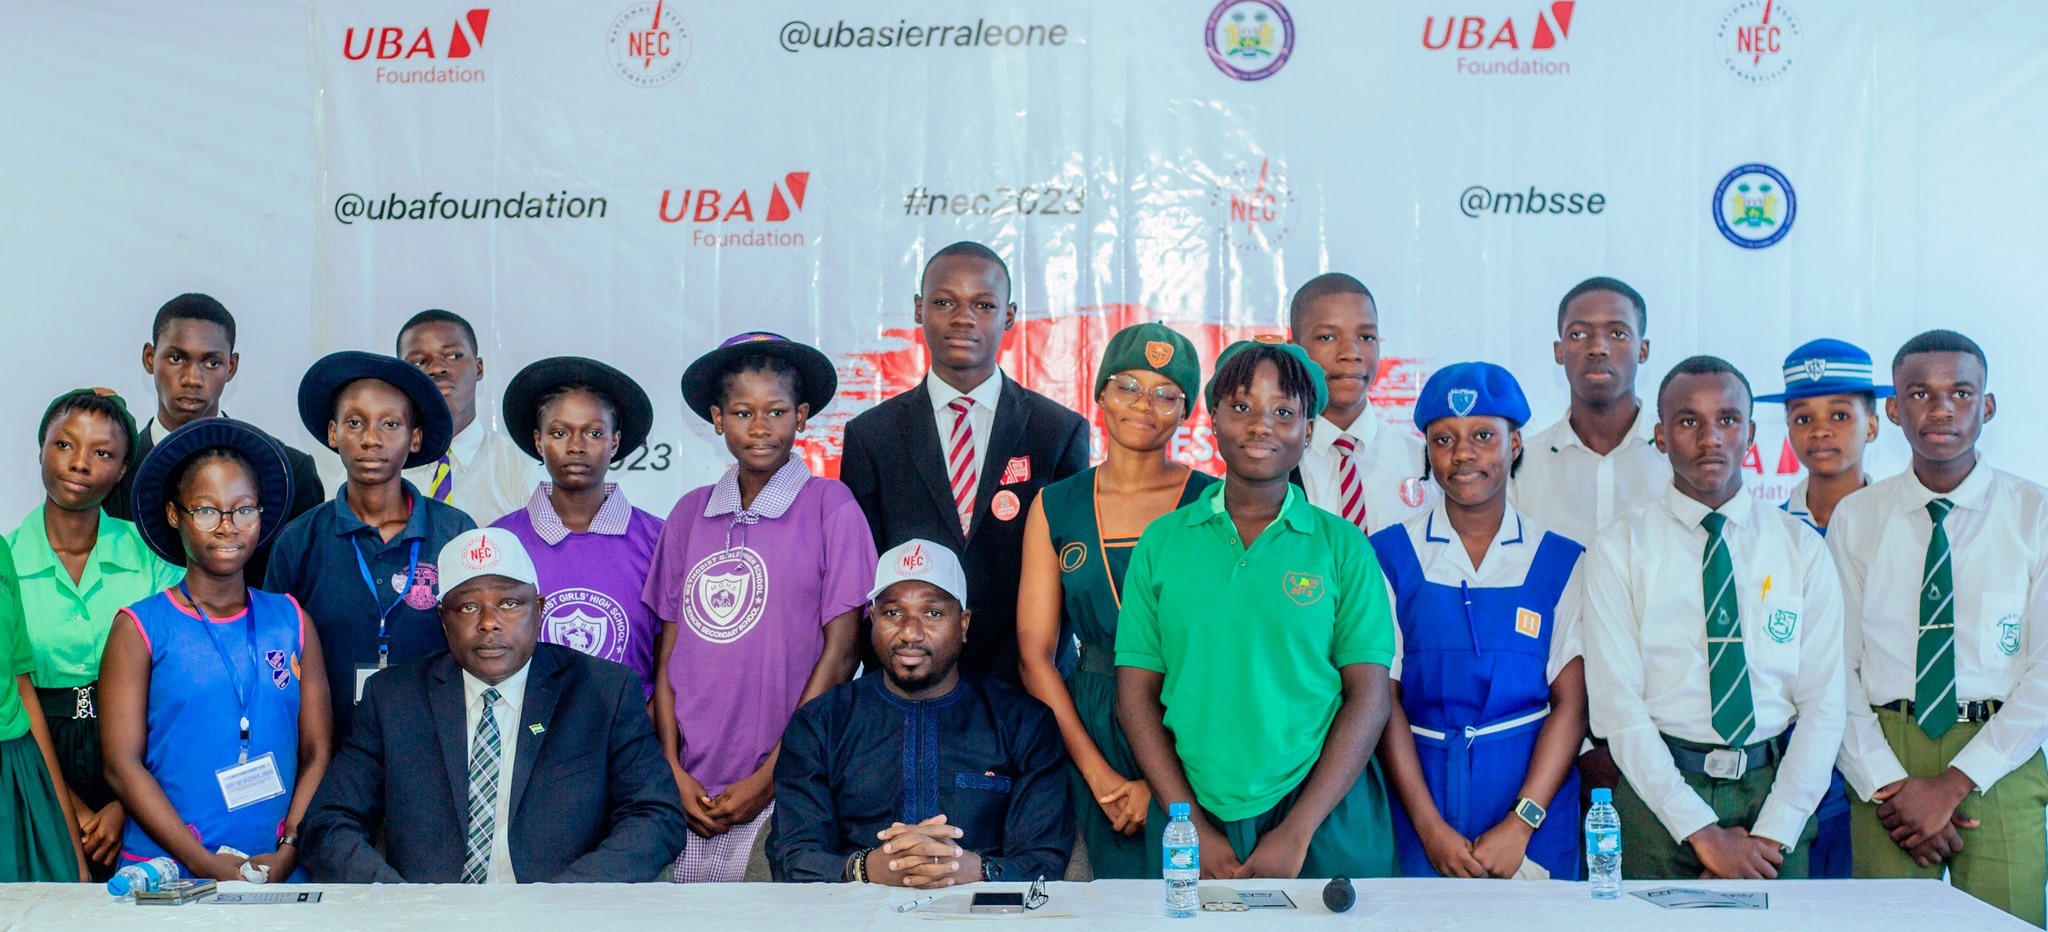 UBAF Launches 4th Edition of NEC